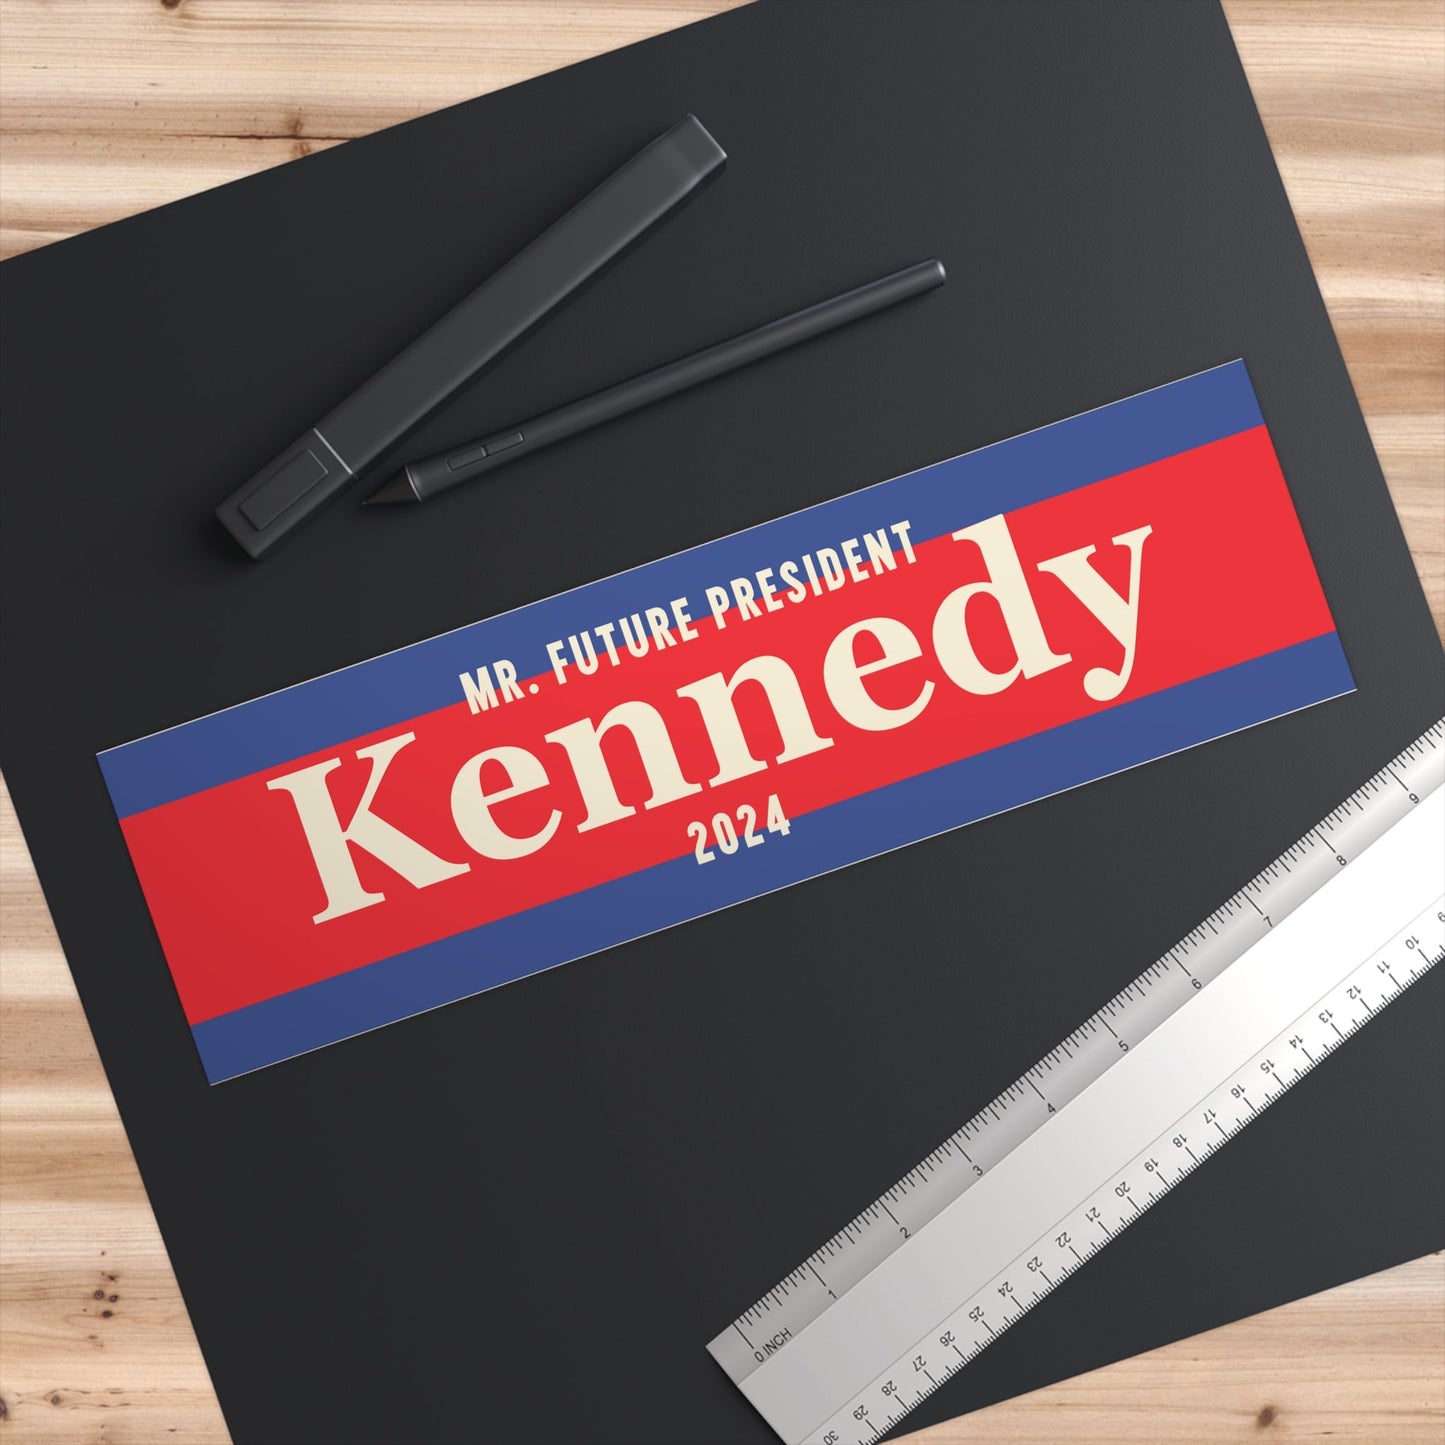 Mr. Future President 2024 Bumper Sticker - TEAM KENNEDY. All rights reserved